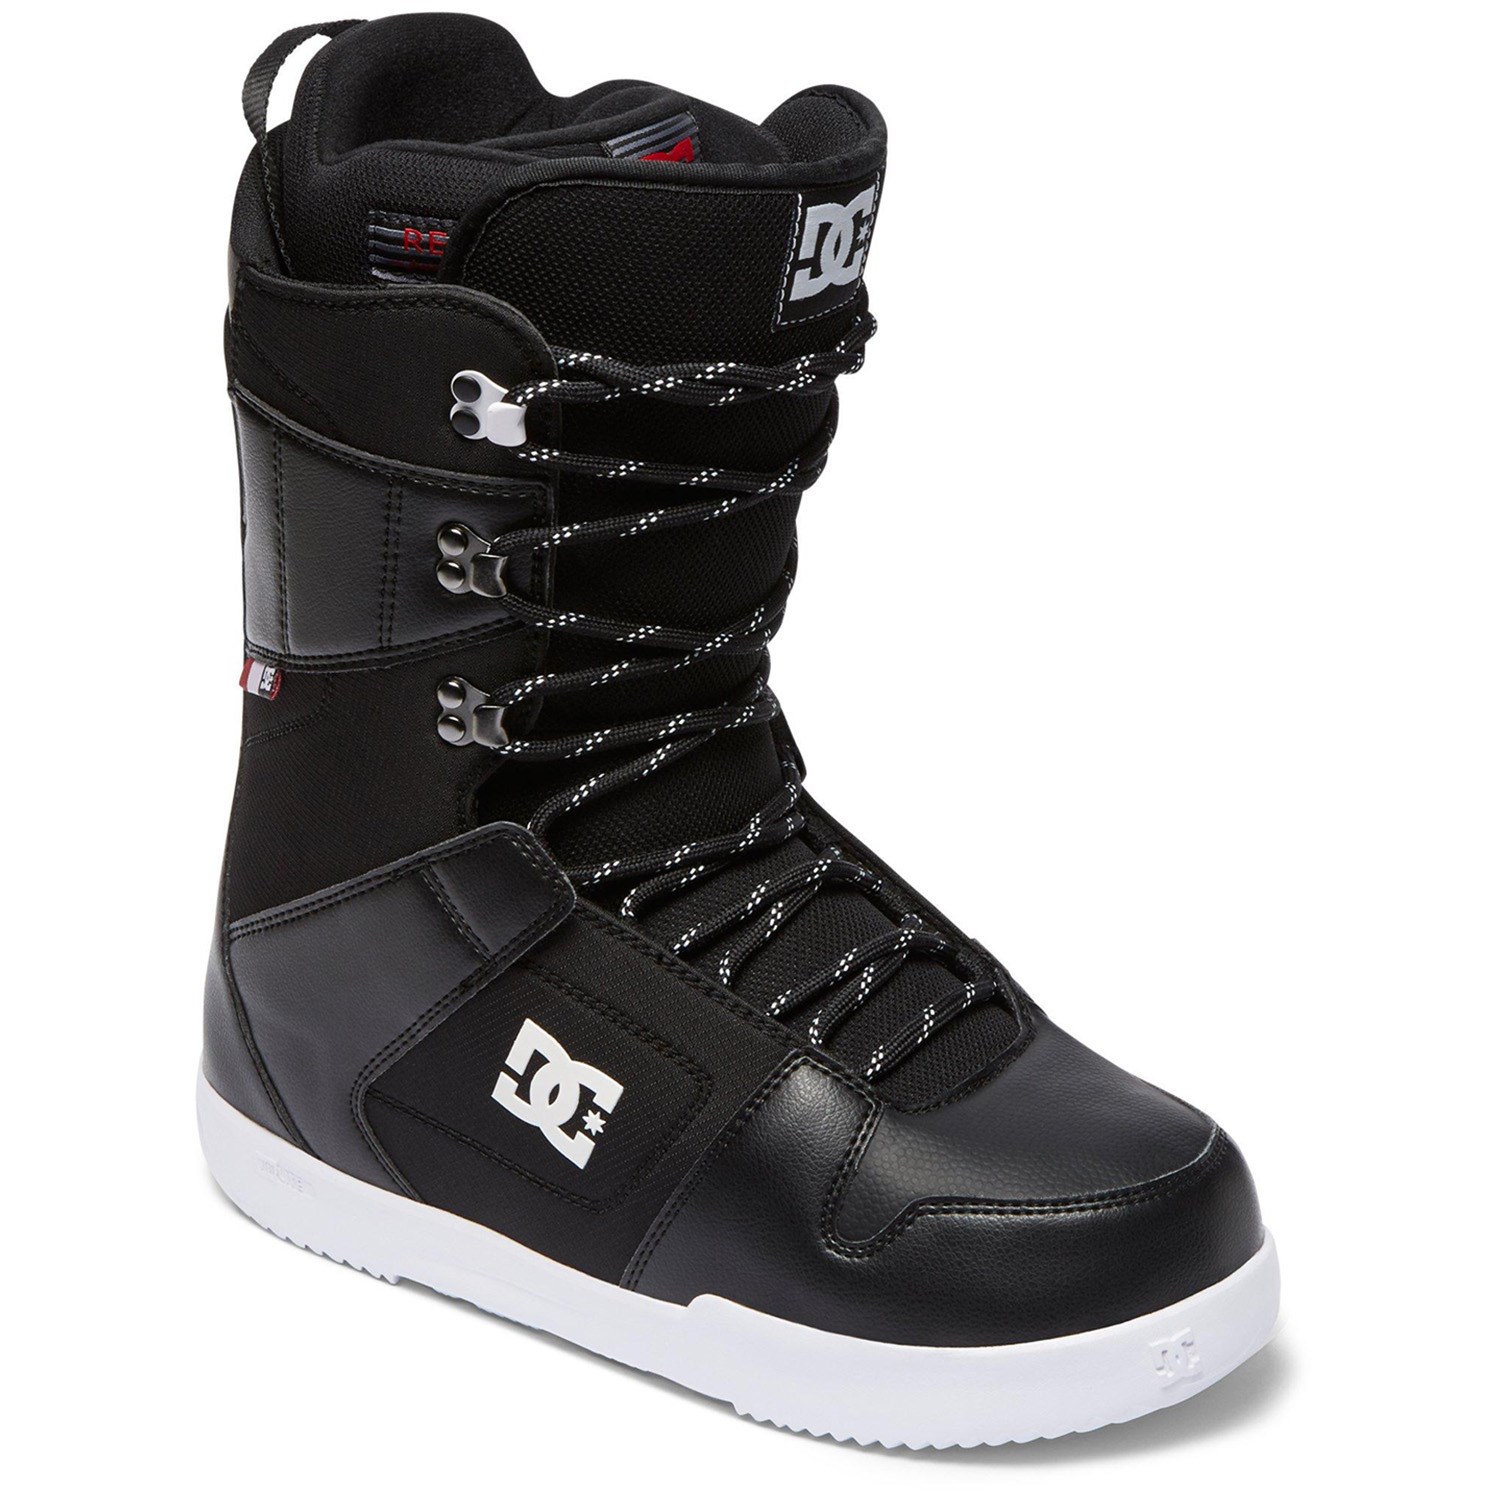 snowboarding boots dc